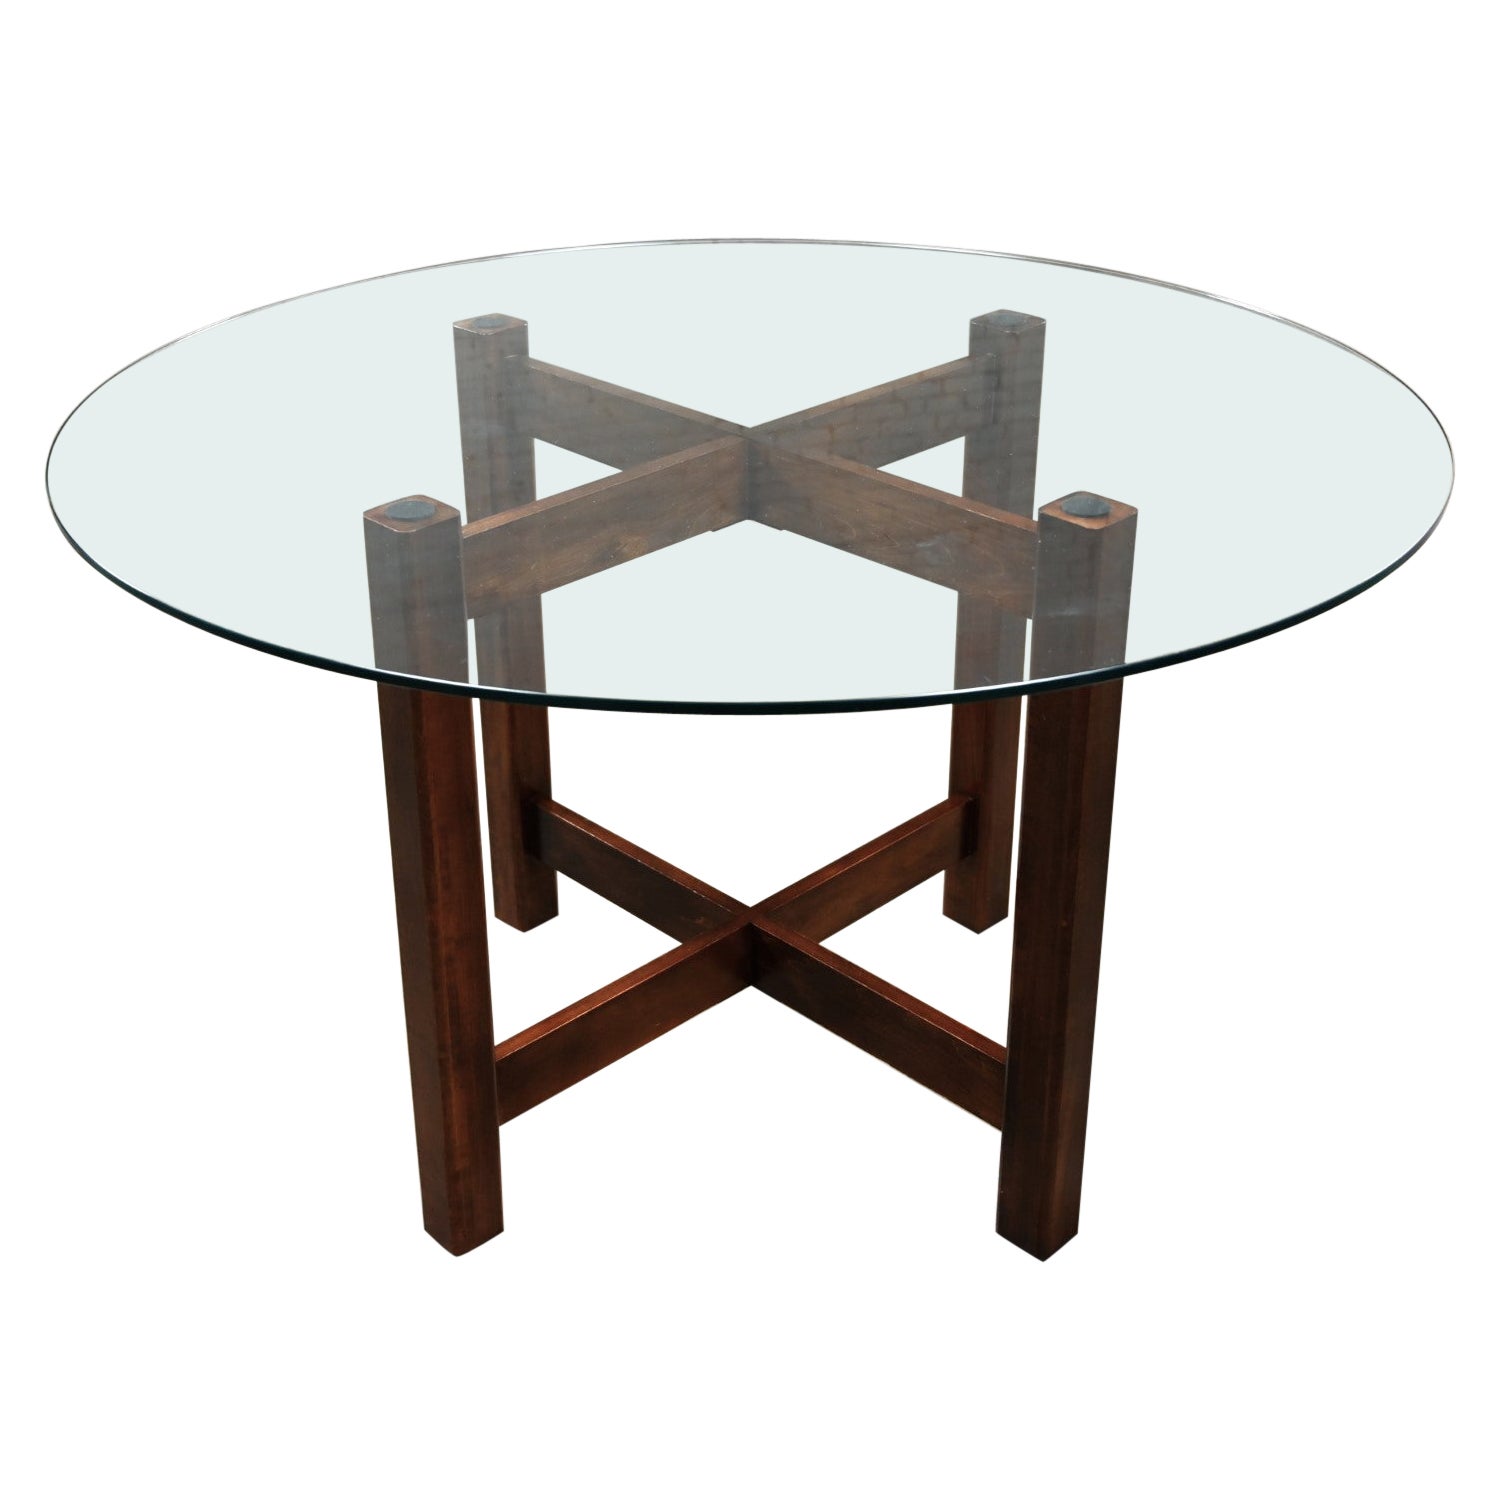 Late 20th Century Modern Walnut X-Base Dining Room Table Round Tempered Glass 